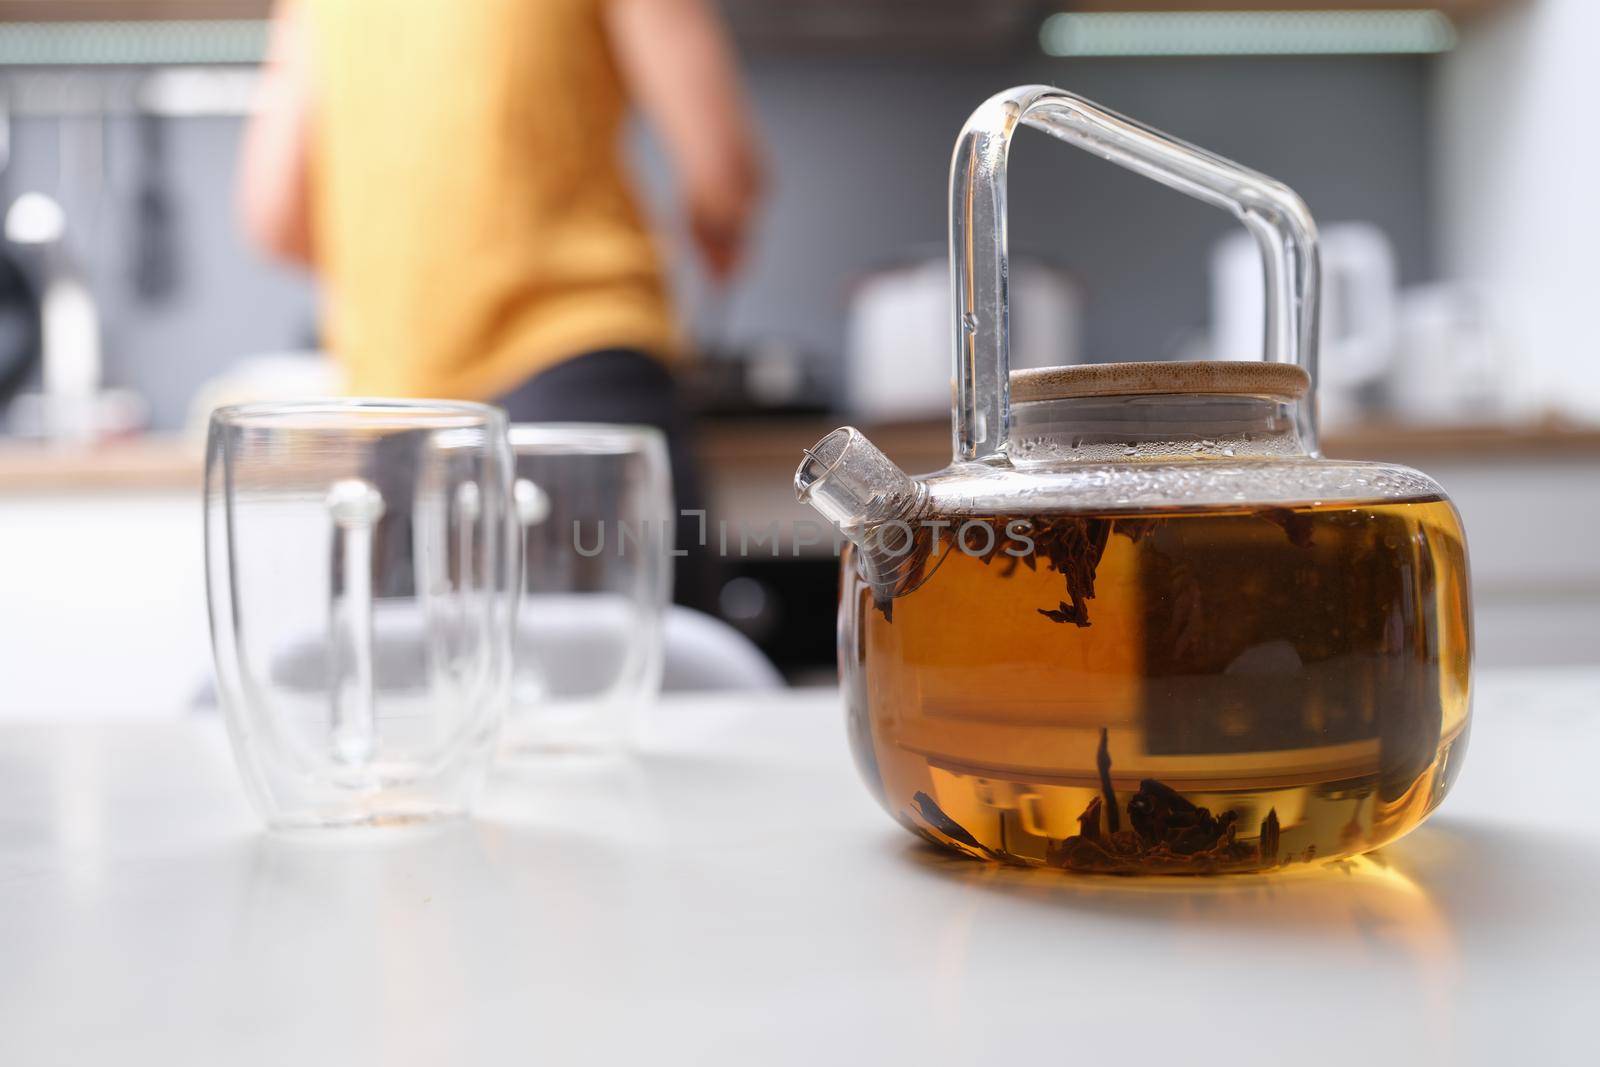 A woman made tea in a glass teapot, close-up by kuprevich